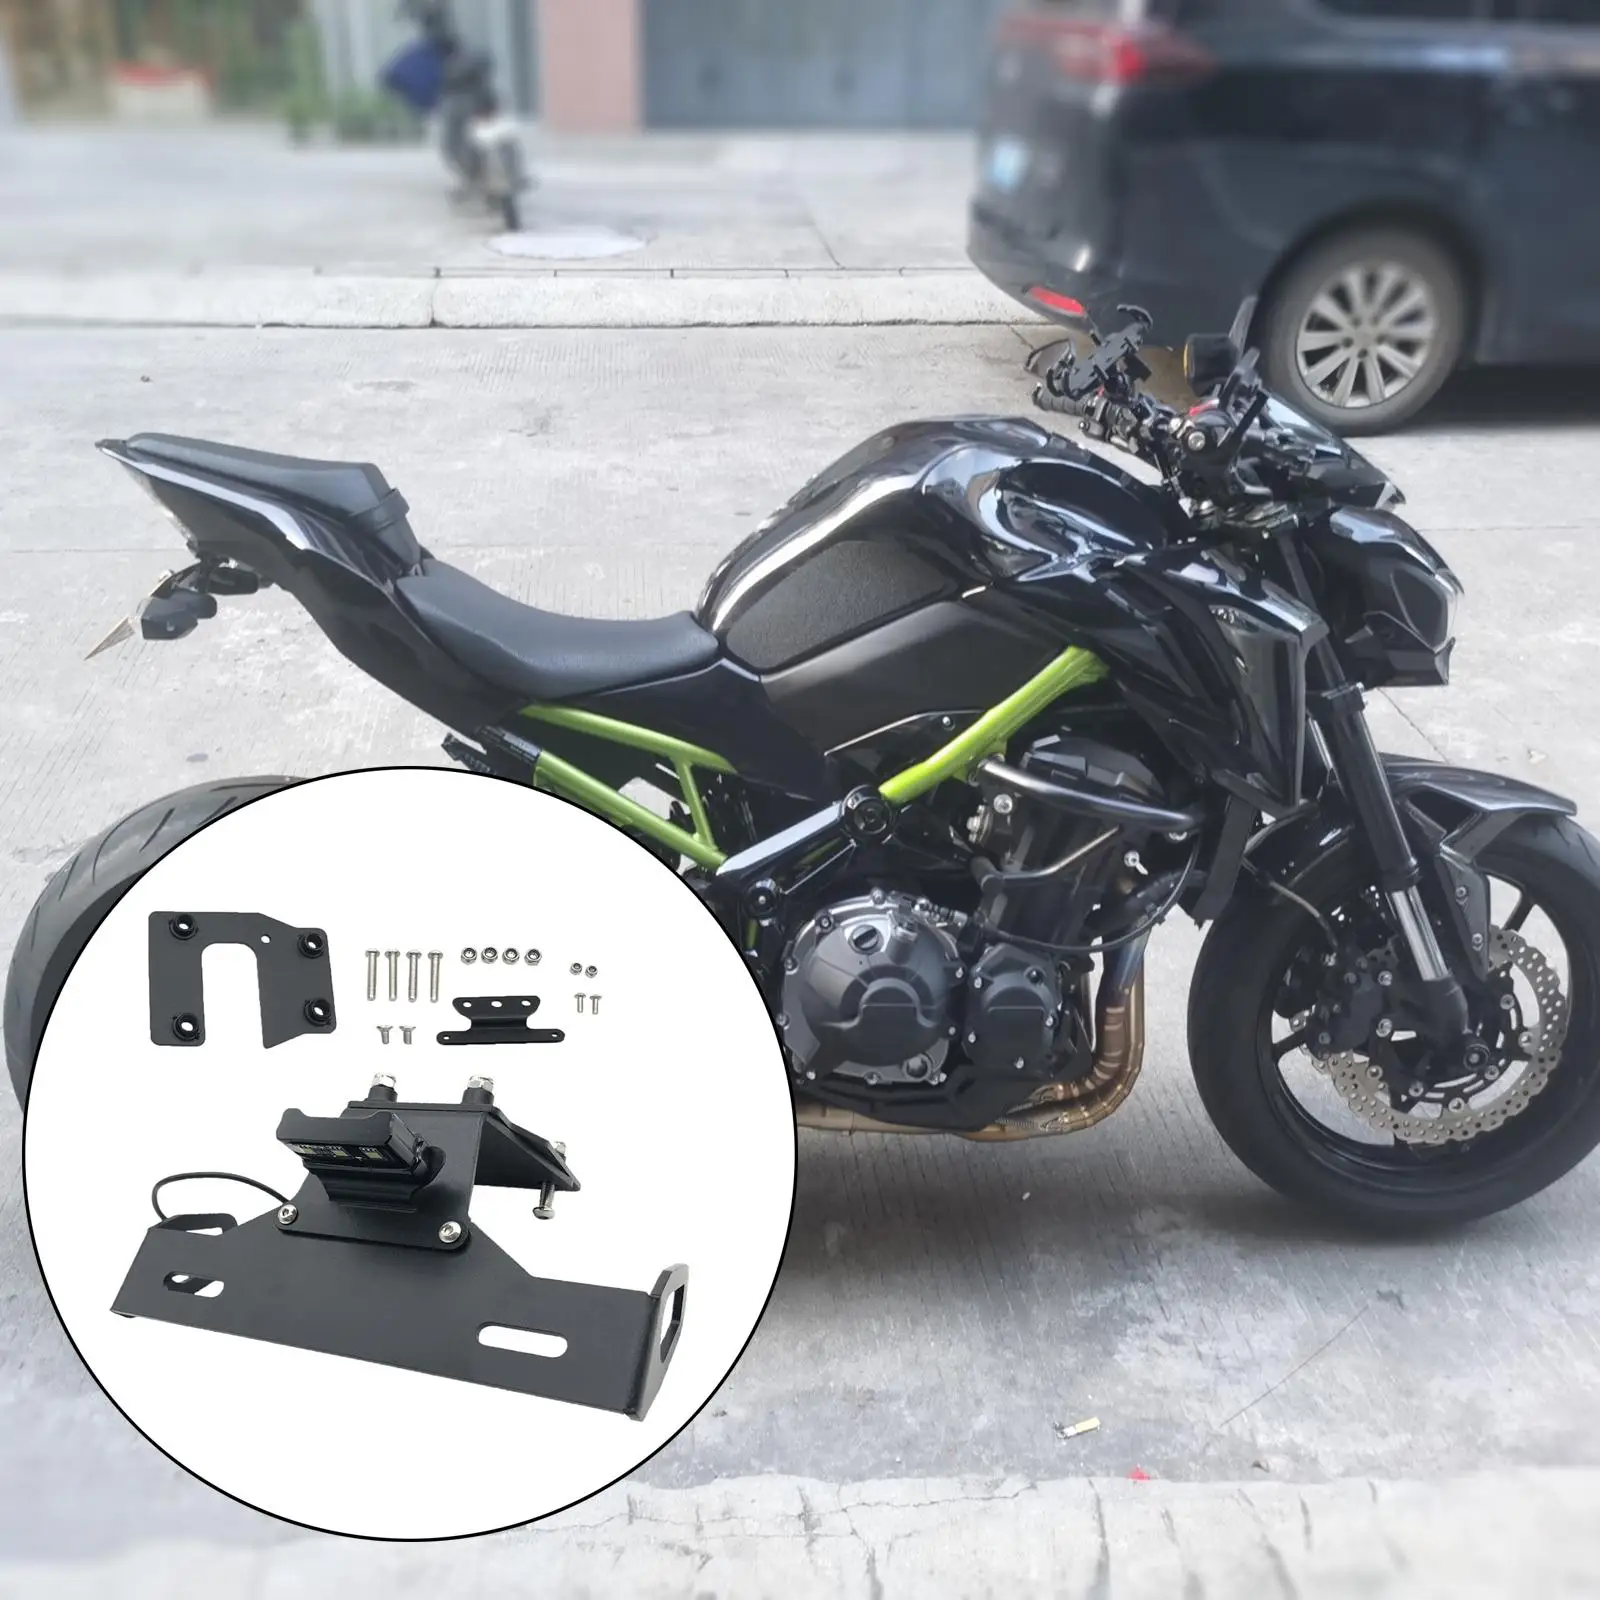 License Plate Holder, Tail License Plate Bracket, 900 2017 2018 2019 2020, Motorcycle Accessories